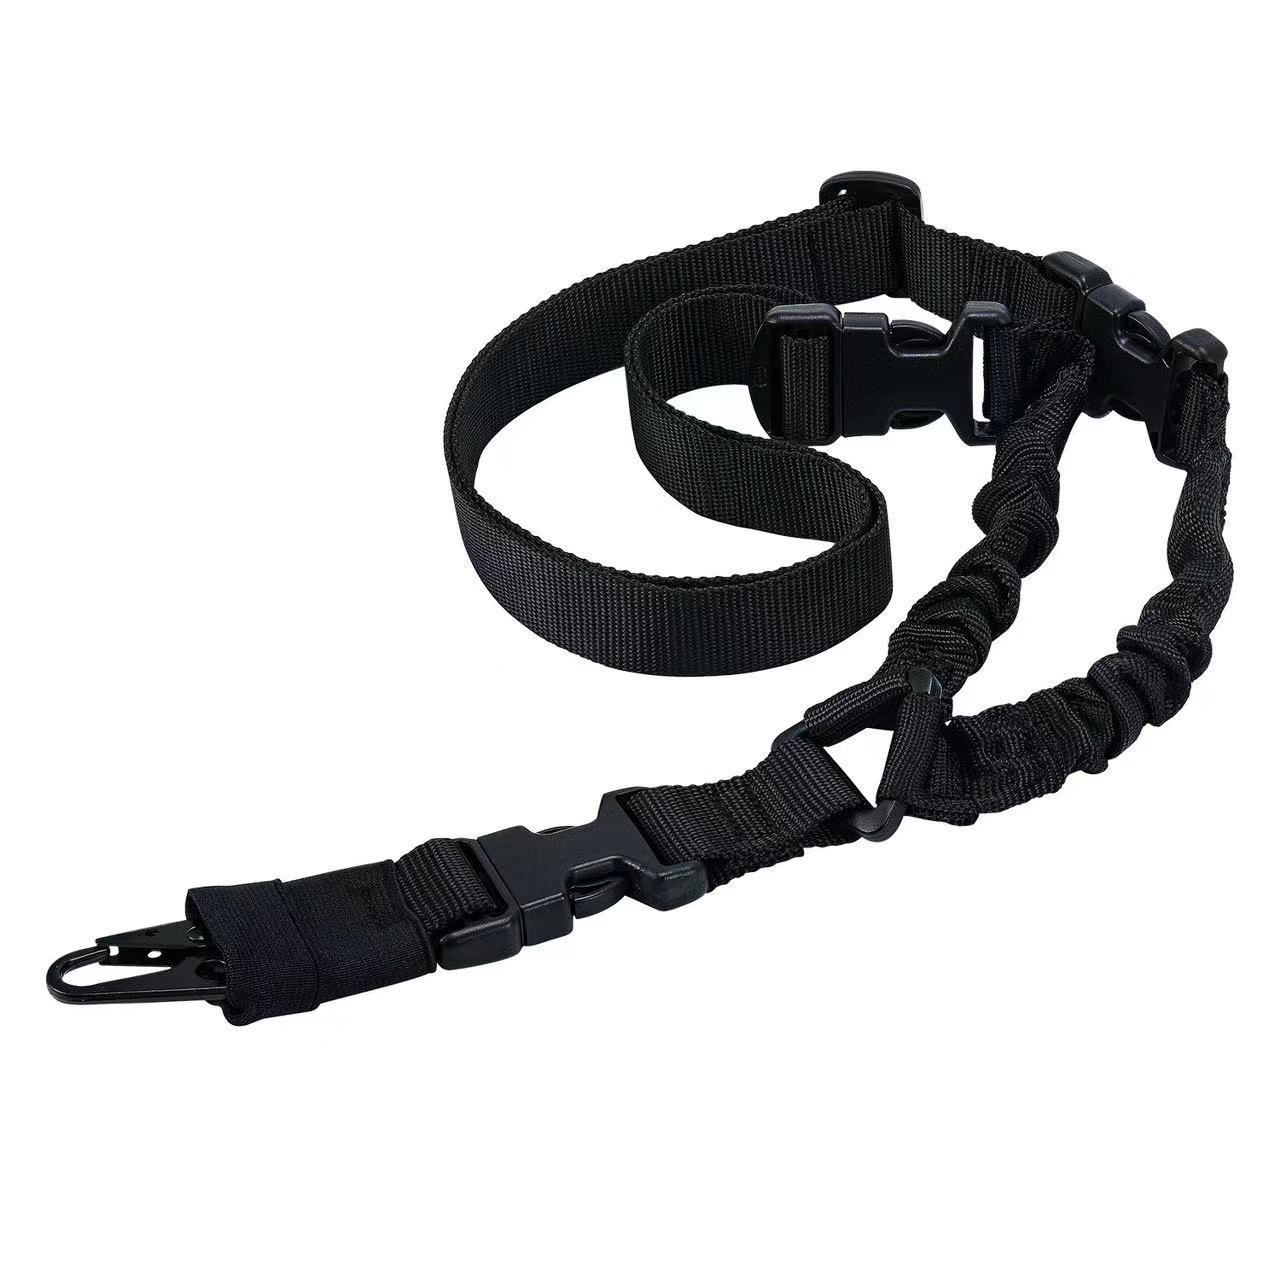 Sandstorm Single Point Quick Release Bungee Sling